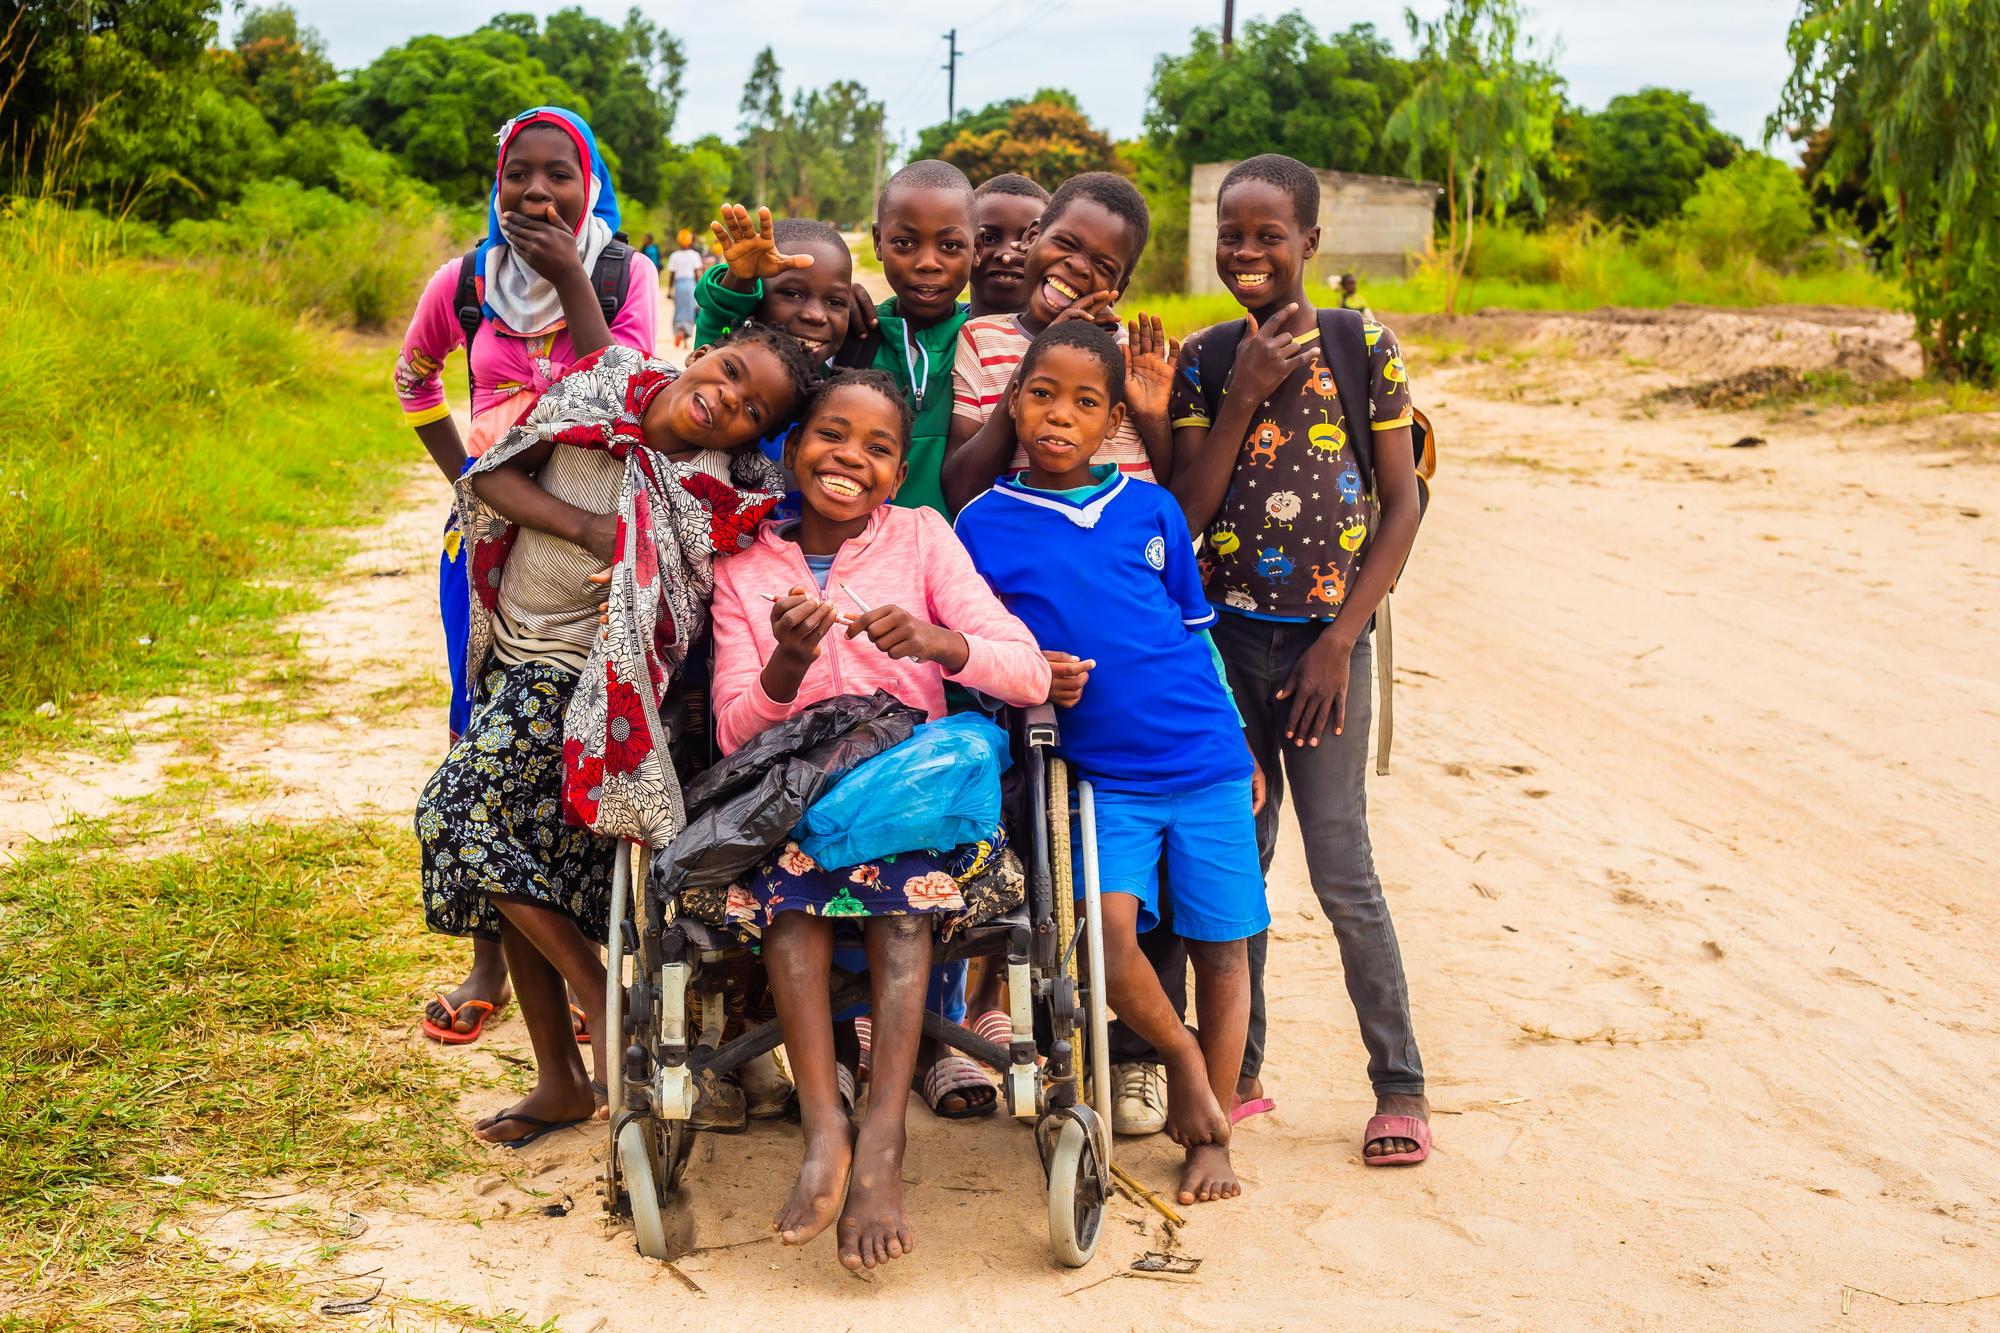 A slideshow image shows a big group of children with and without disabilities are coming together for a picture posing and smiling for the picture.